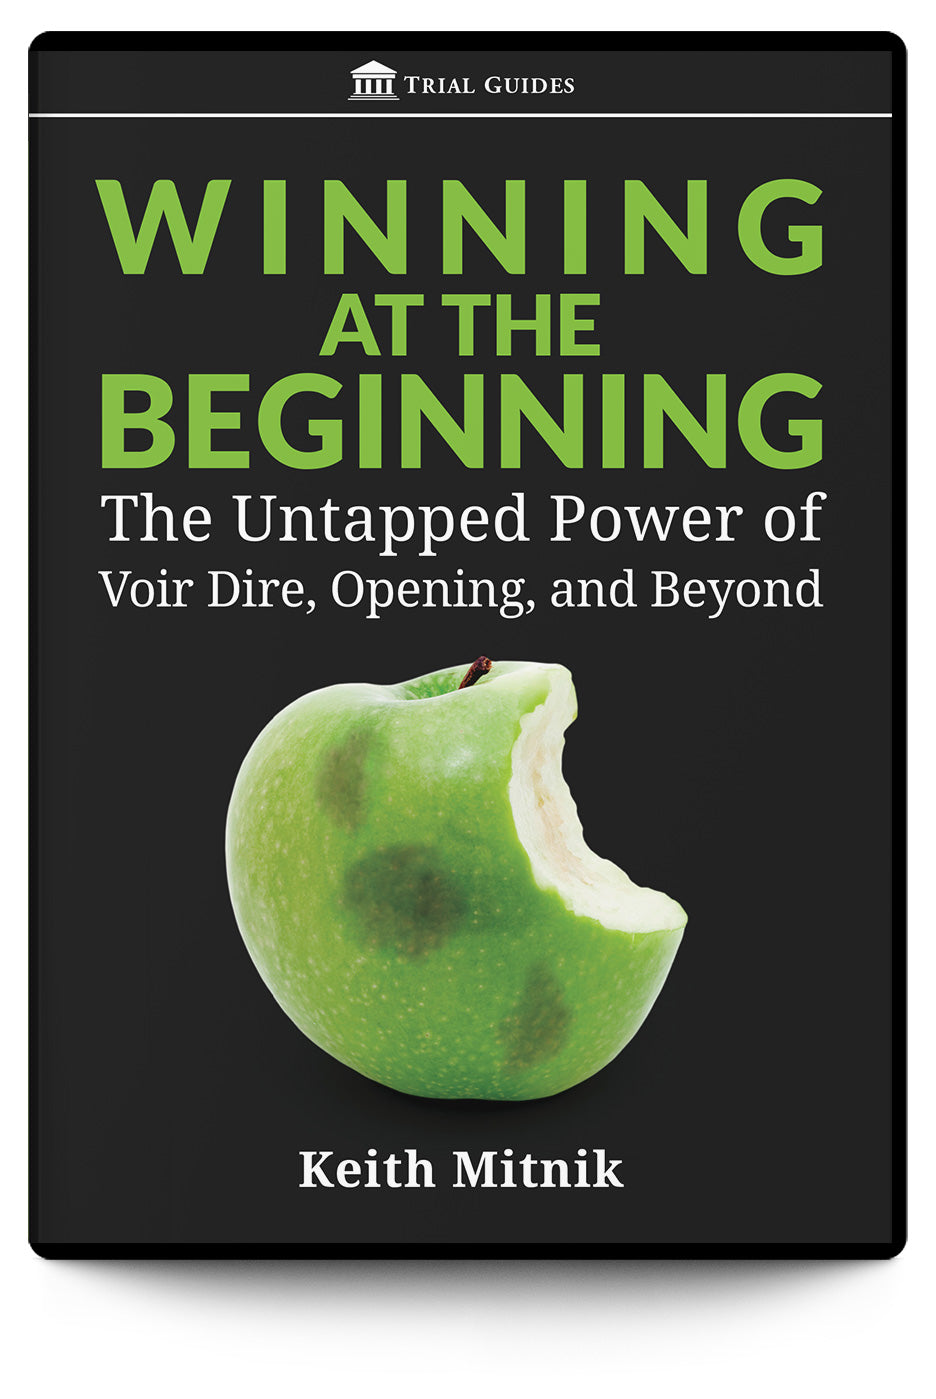 Winning at the Beginning: The Untapped Power of Voir Dire, Opening, and Beyond